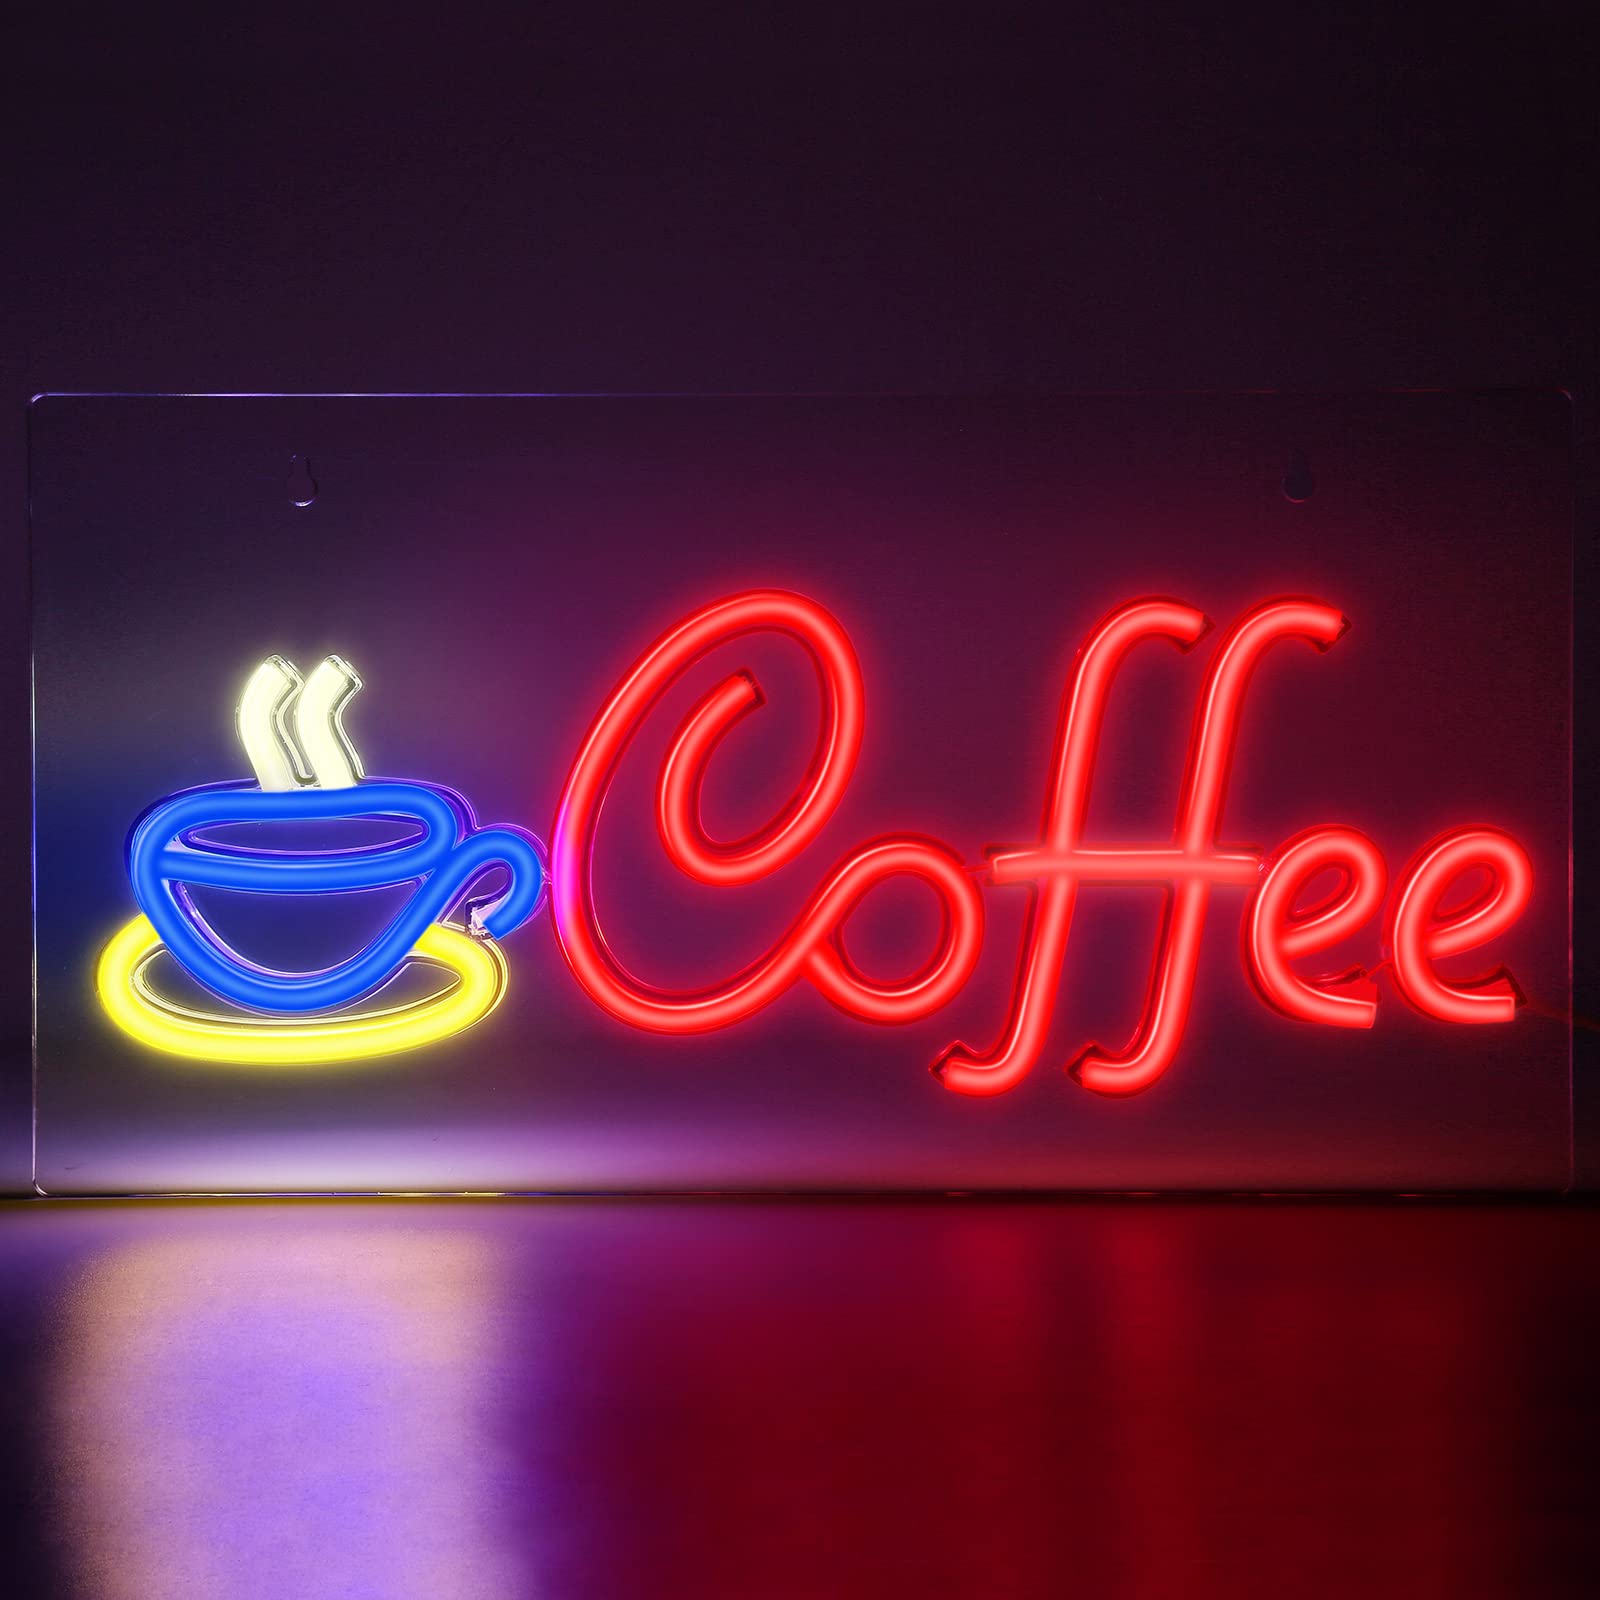 Fitnate Coffee bar Neon Signs Led Neon Sign Light Big Night Light for Room Decor Light Bar Pub Beach Shop Game Office Restaurant Concert Hall Wall Art Decoration Sign USB Operated (17”x 9”)